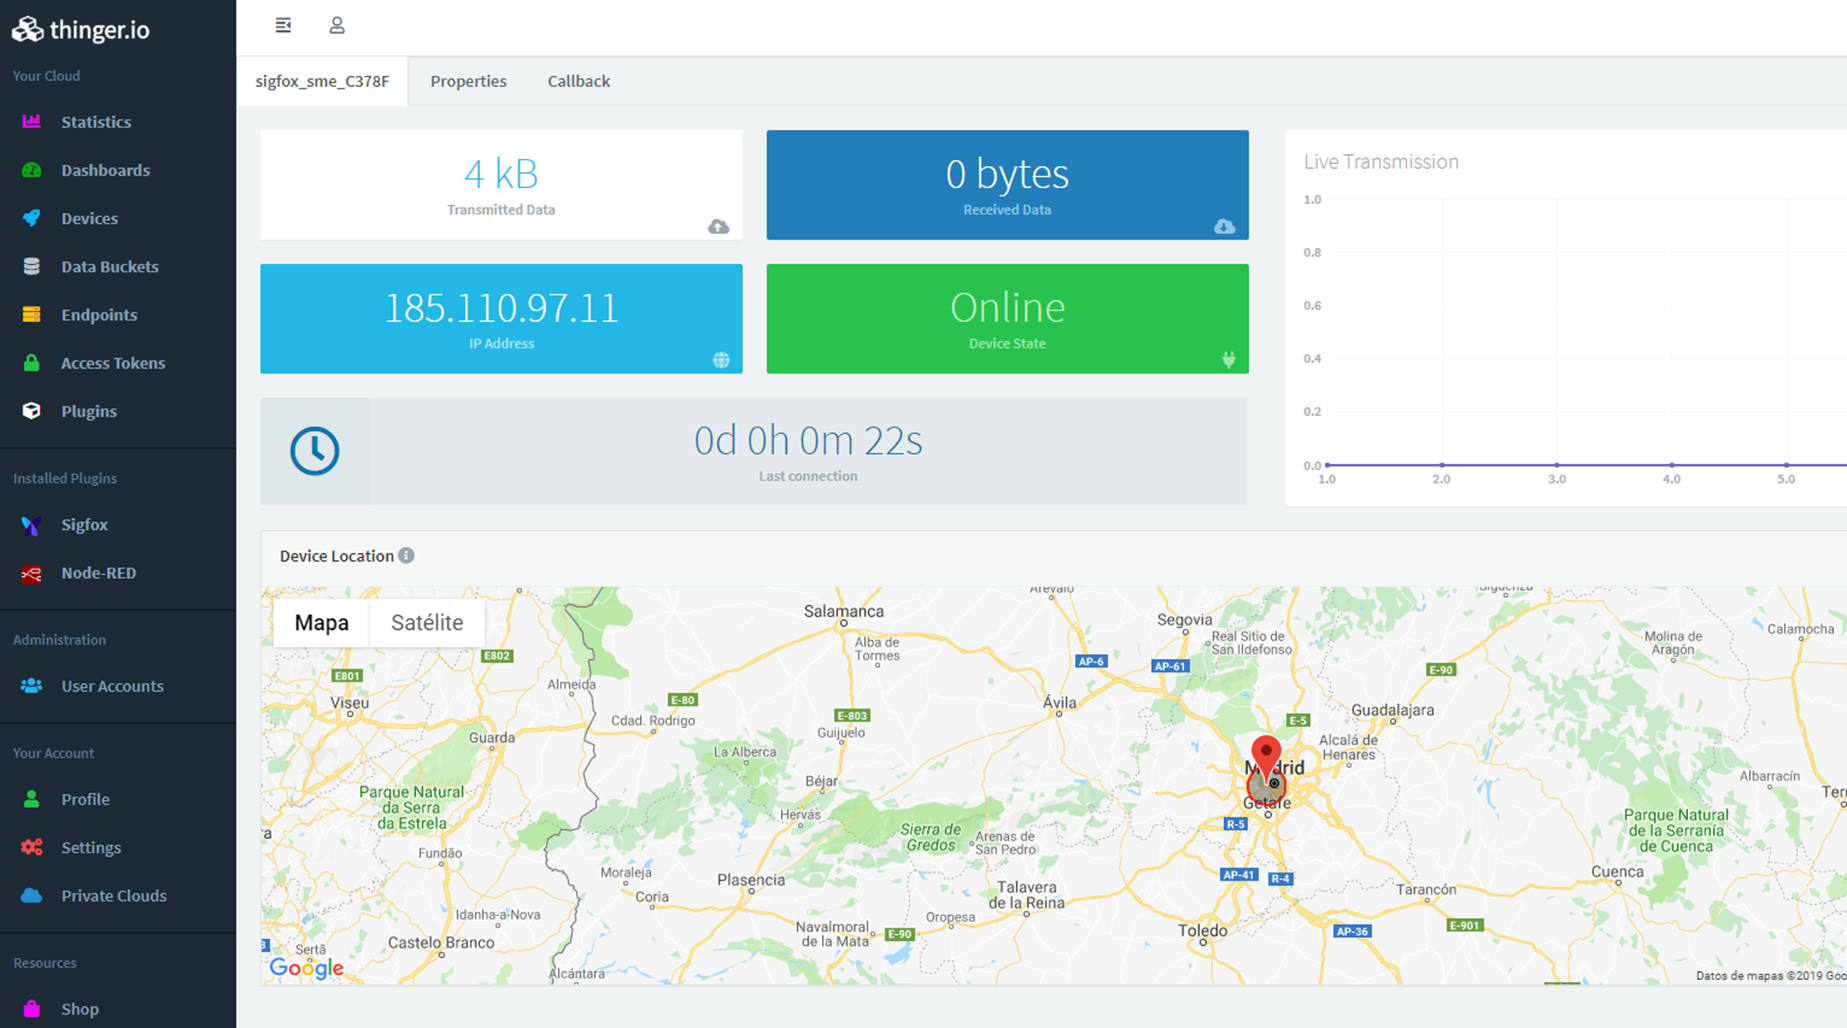 Checking Sigfox device status and location with Thinger.io